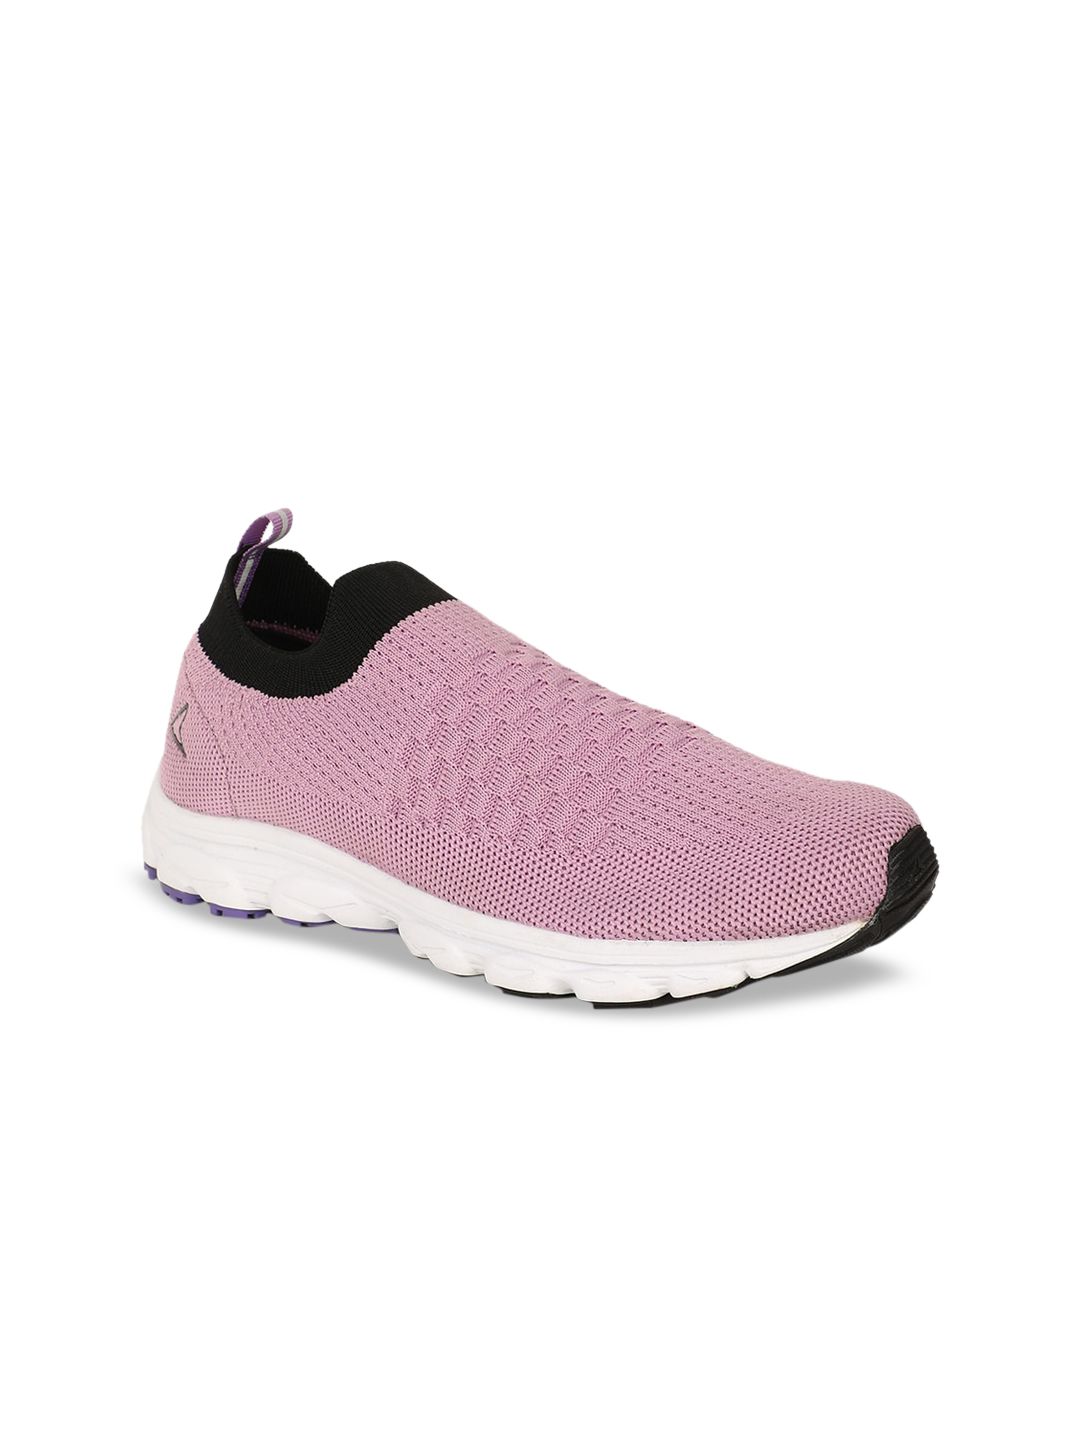 Power Women Purple Textile Running Shoes Price in India